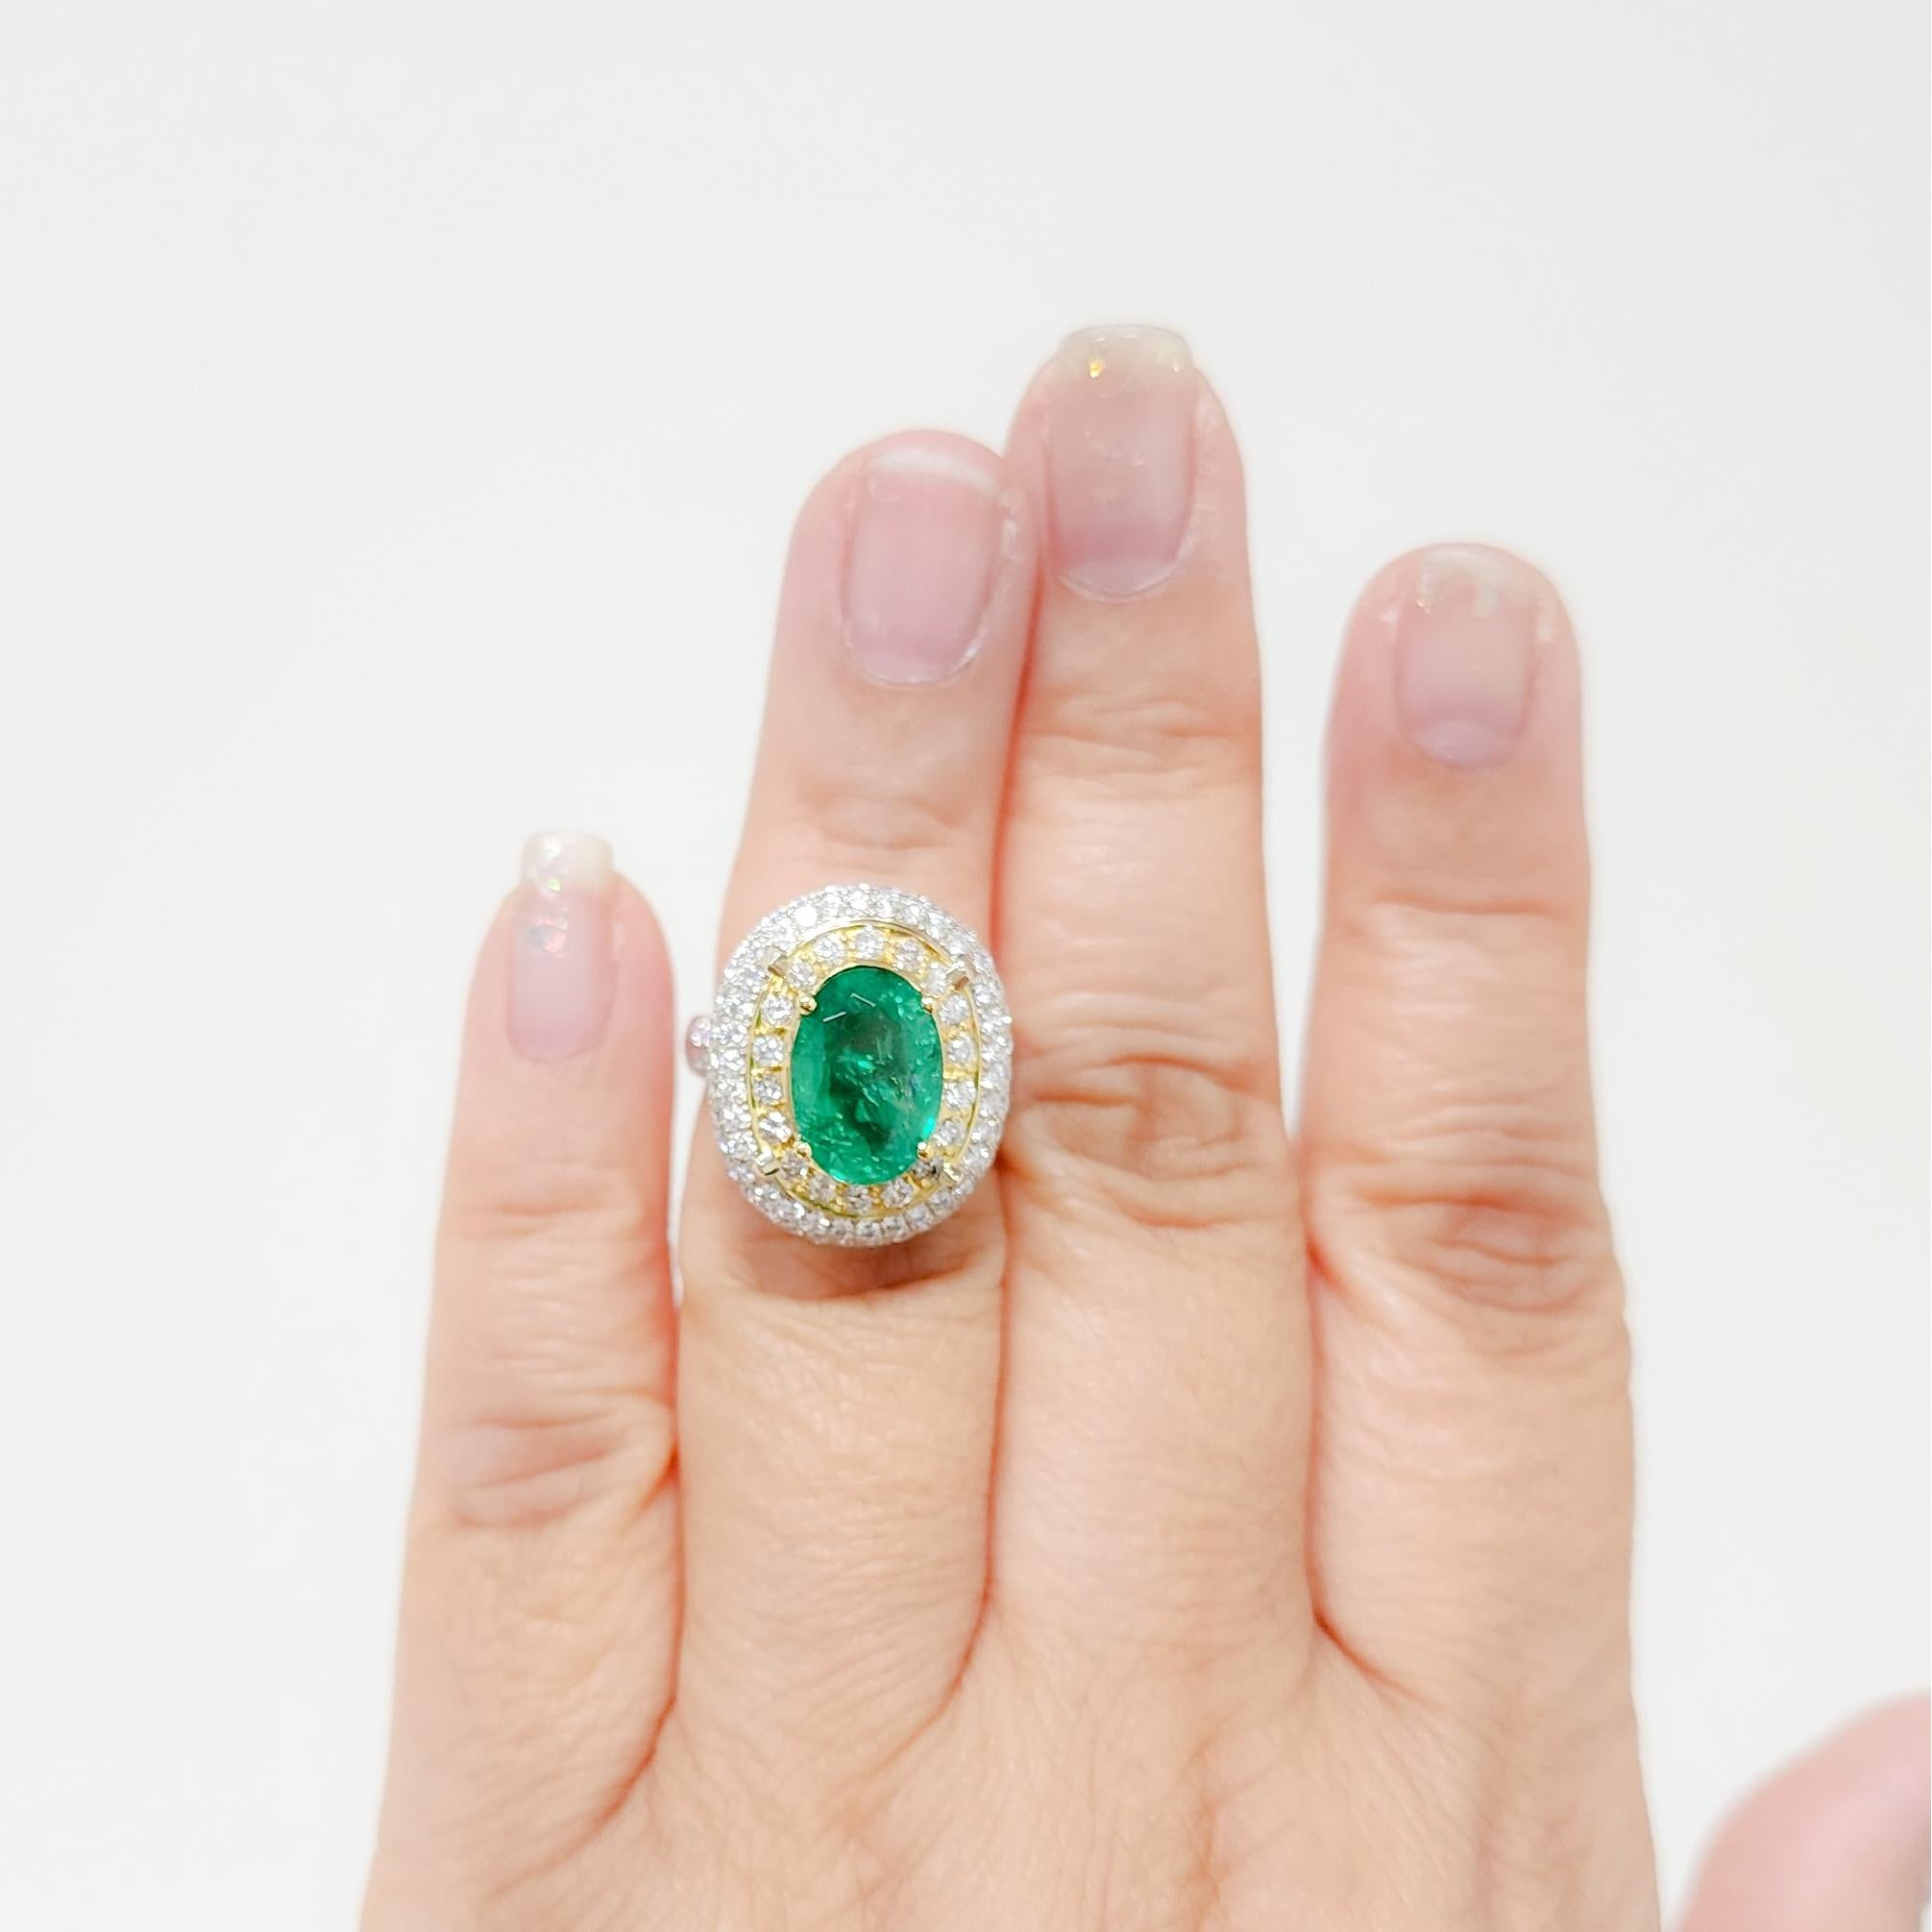 Beautiful 4.06 ct. emerald oval with 1.31 ct. good quality, white, and bright diamond rounds.  Handmade in 14k white and yellow gold.  Ring size 5.75.